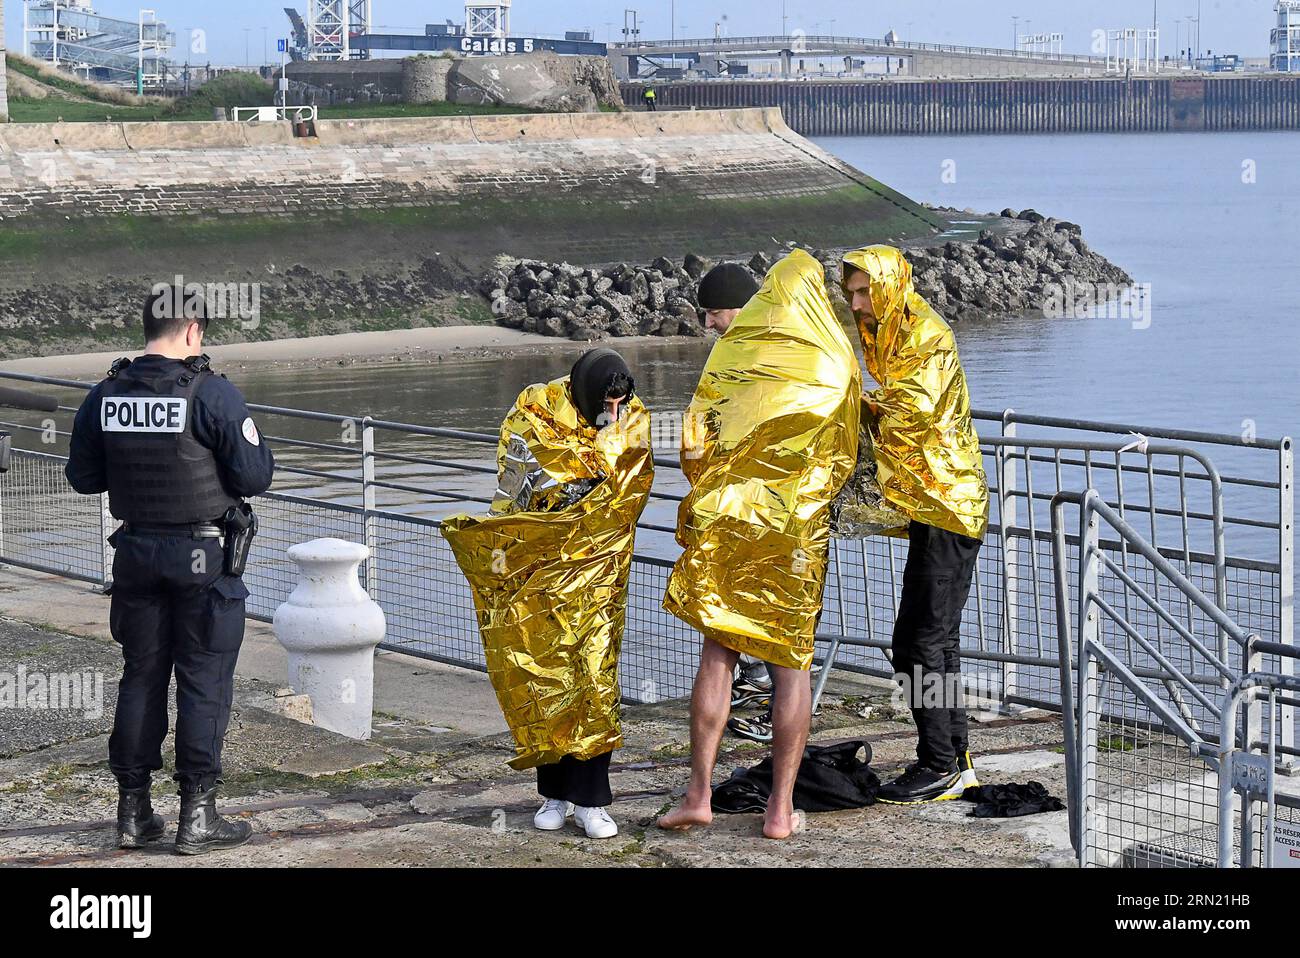 Calais, November 13, 2022 (northern France): three migrants rescued at sea during a Channel crossing to the UK. Migrants with survival blankets brough Stock Photo